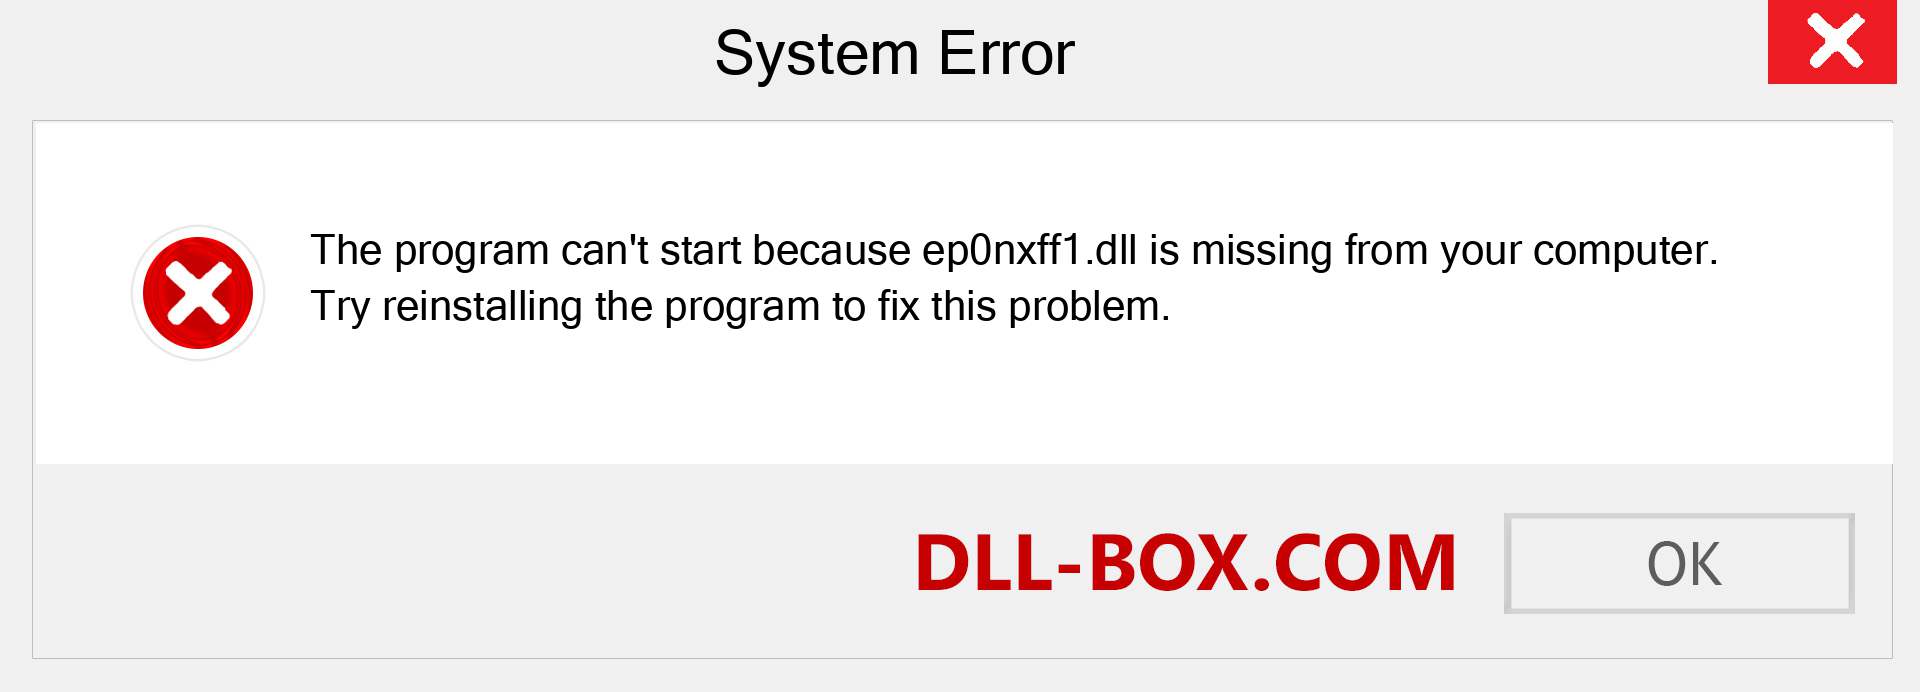  ep0nxff1.dll file is missing?. Download for Windows 7, 8, 10 - Fix  ep0nxff1 dll Missing Error on Windows, photos, images